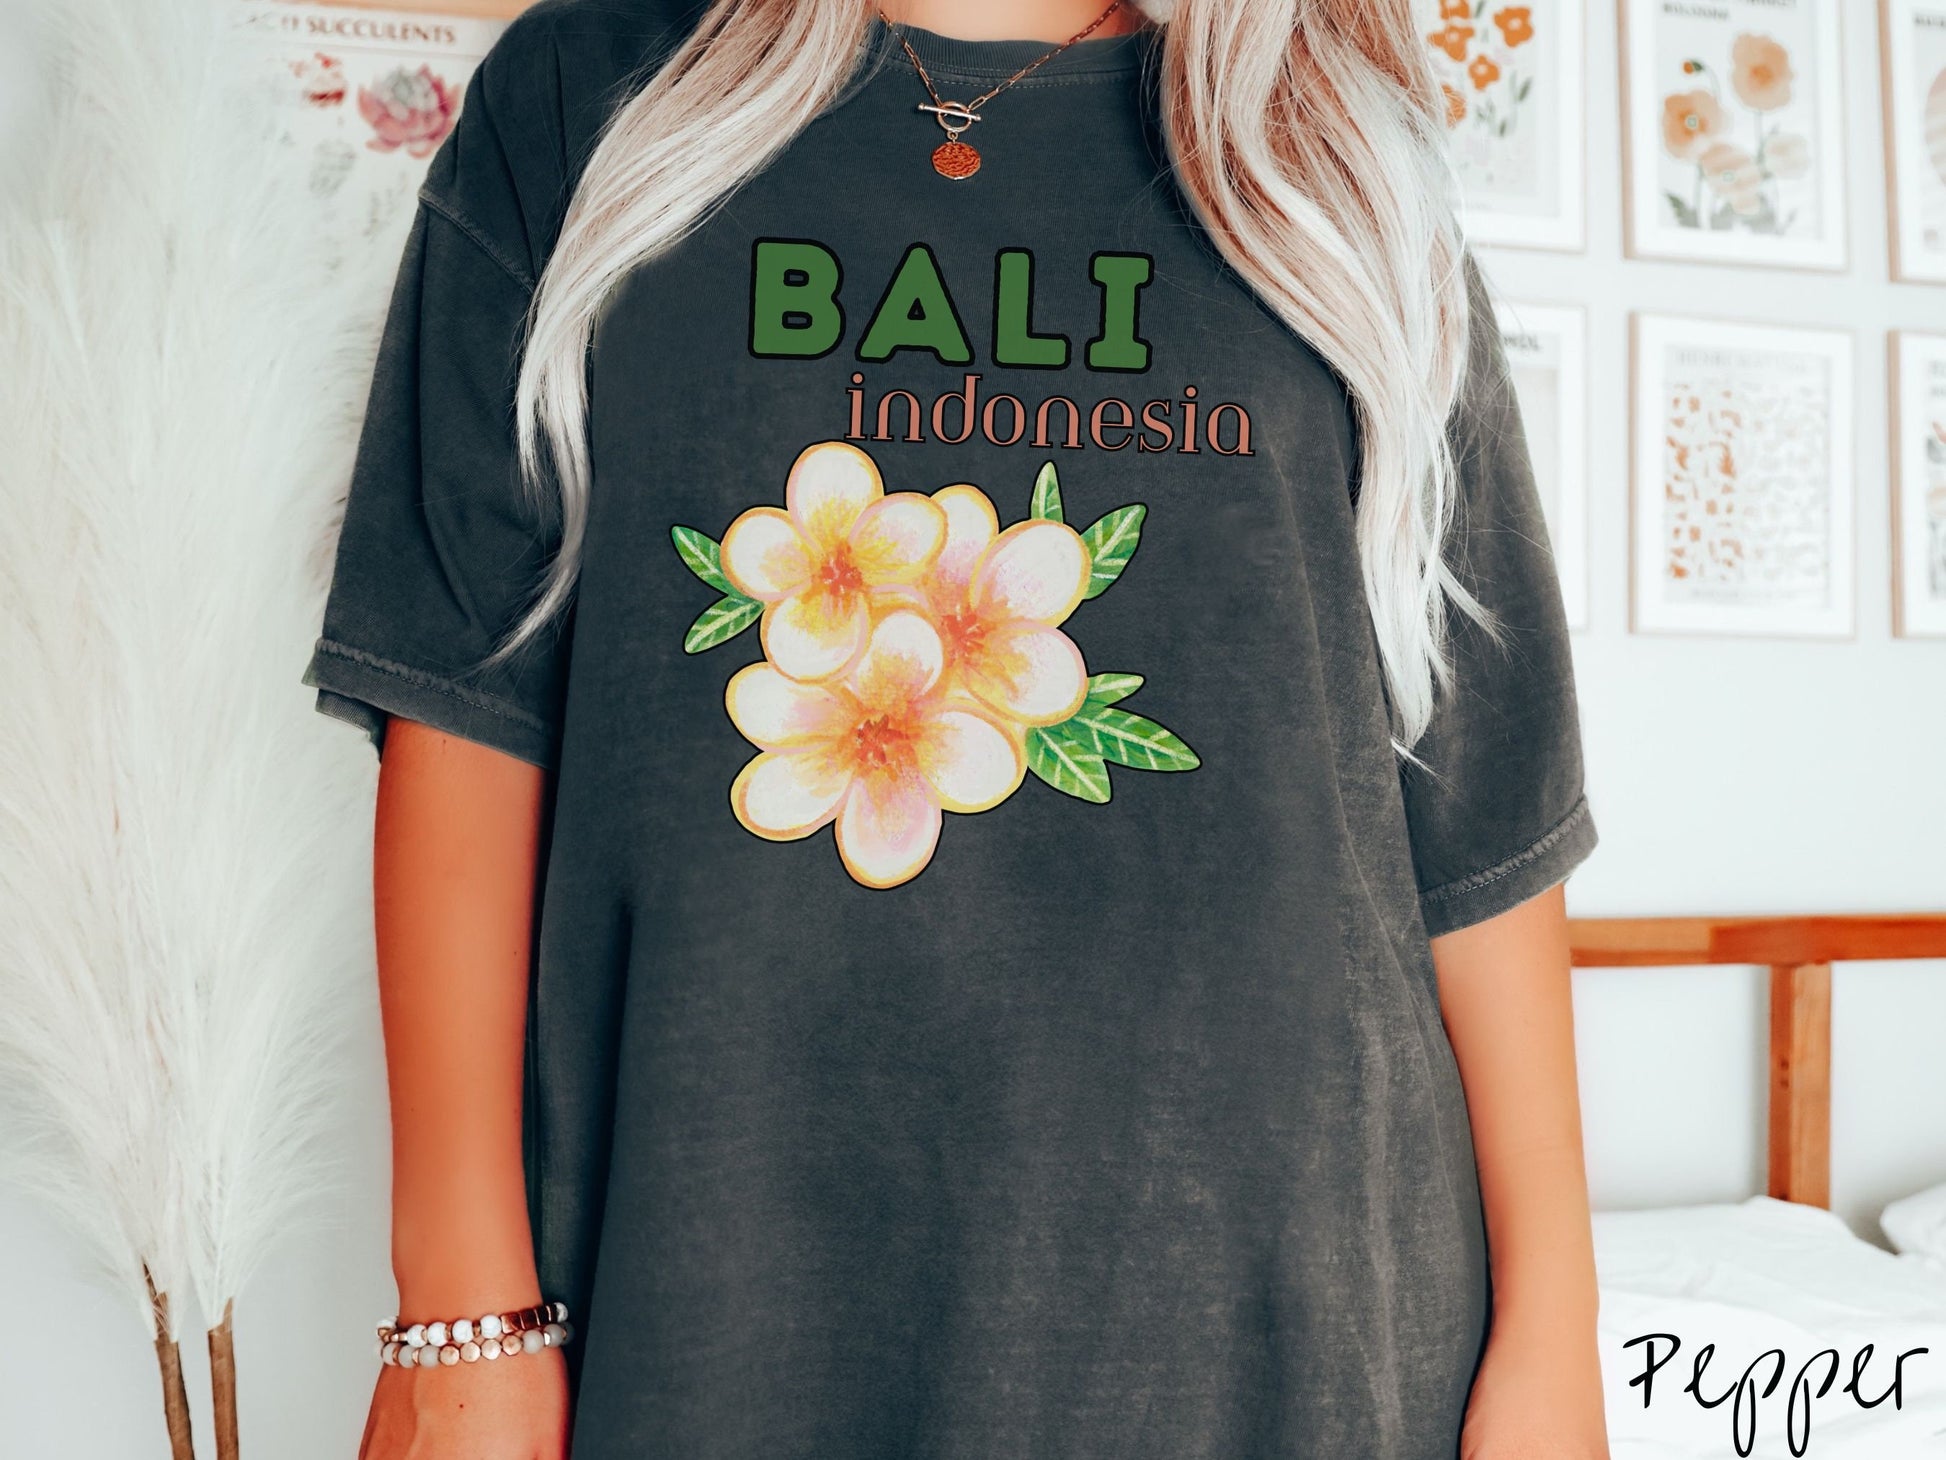 A woman wearing a vintage, pepper colored shirt with the text Bali Indonesia in green and yellow font, respectively, and a picture underneath of three beautiful yellow and orange flowers with green leaves.